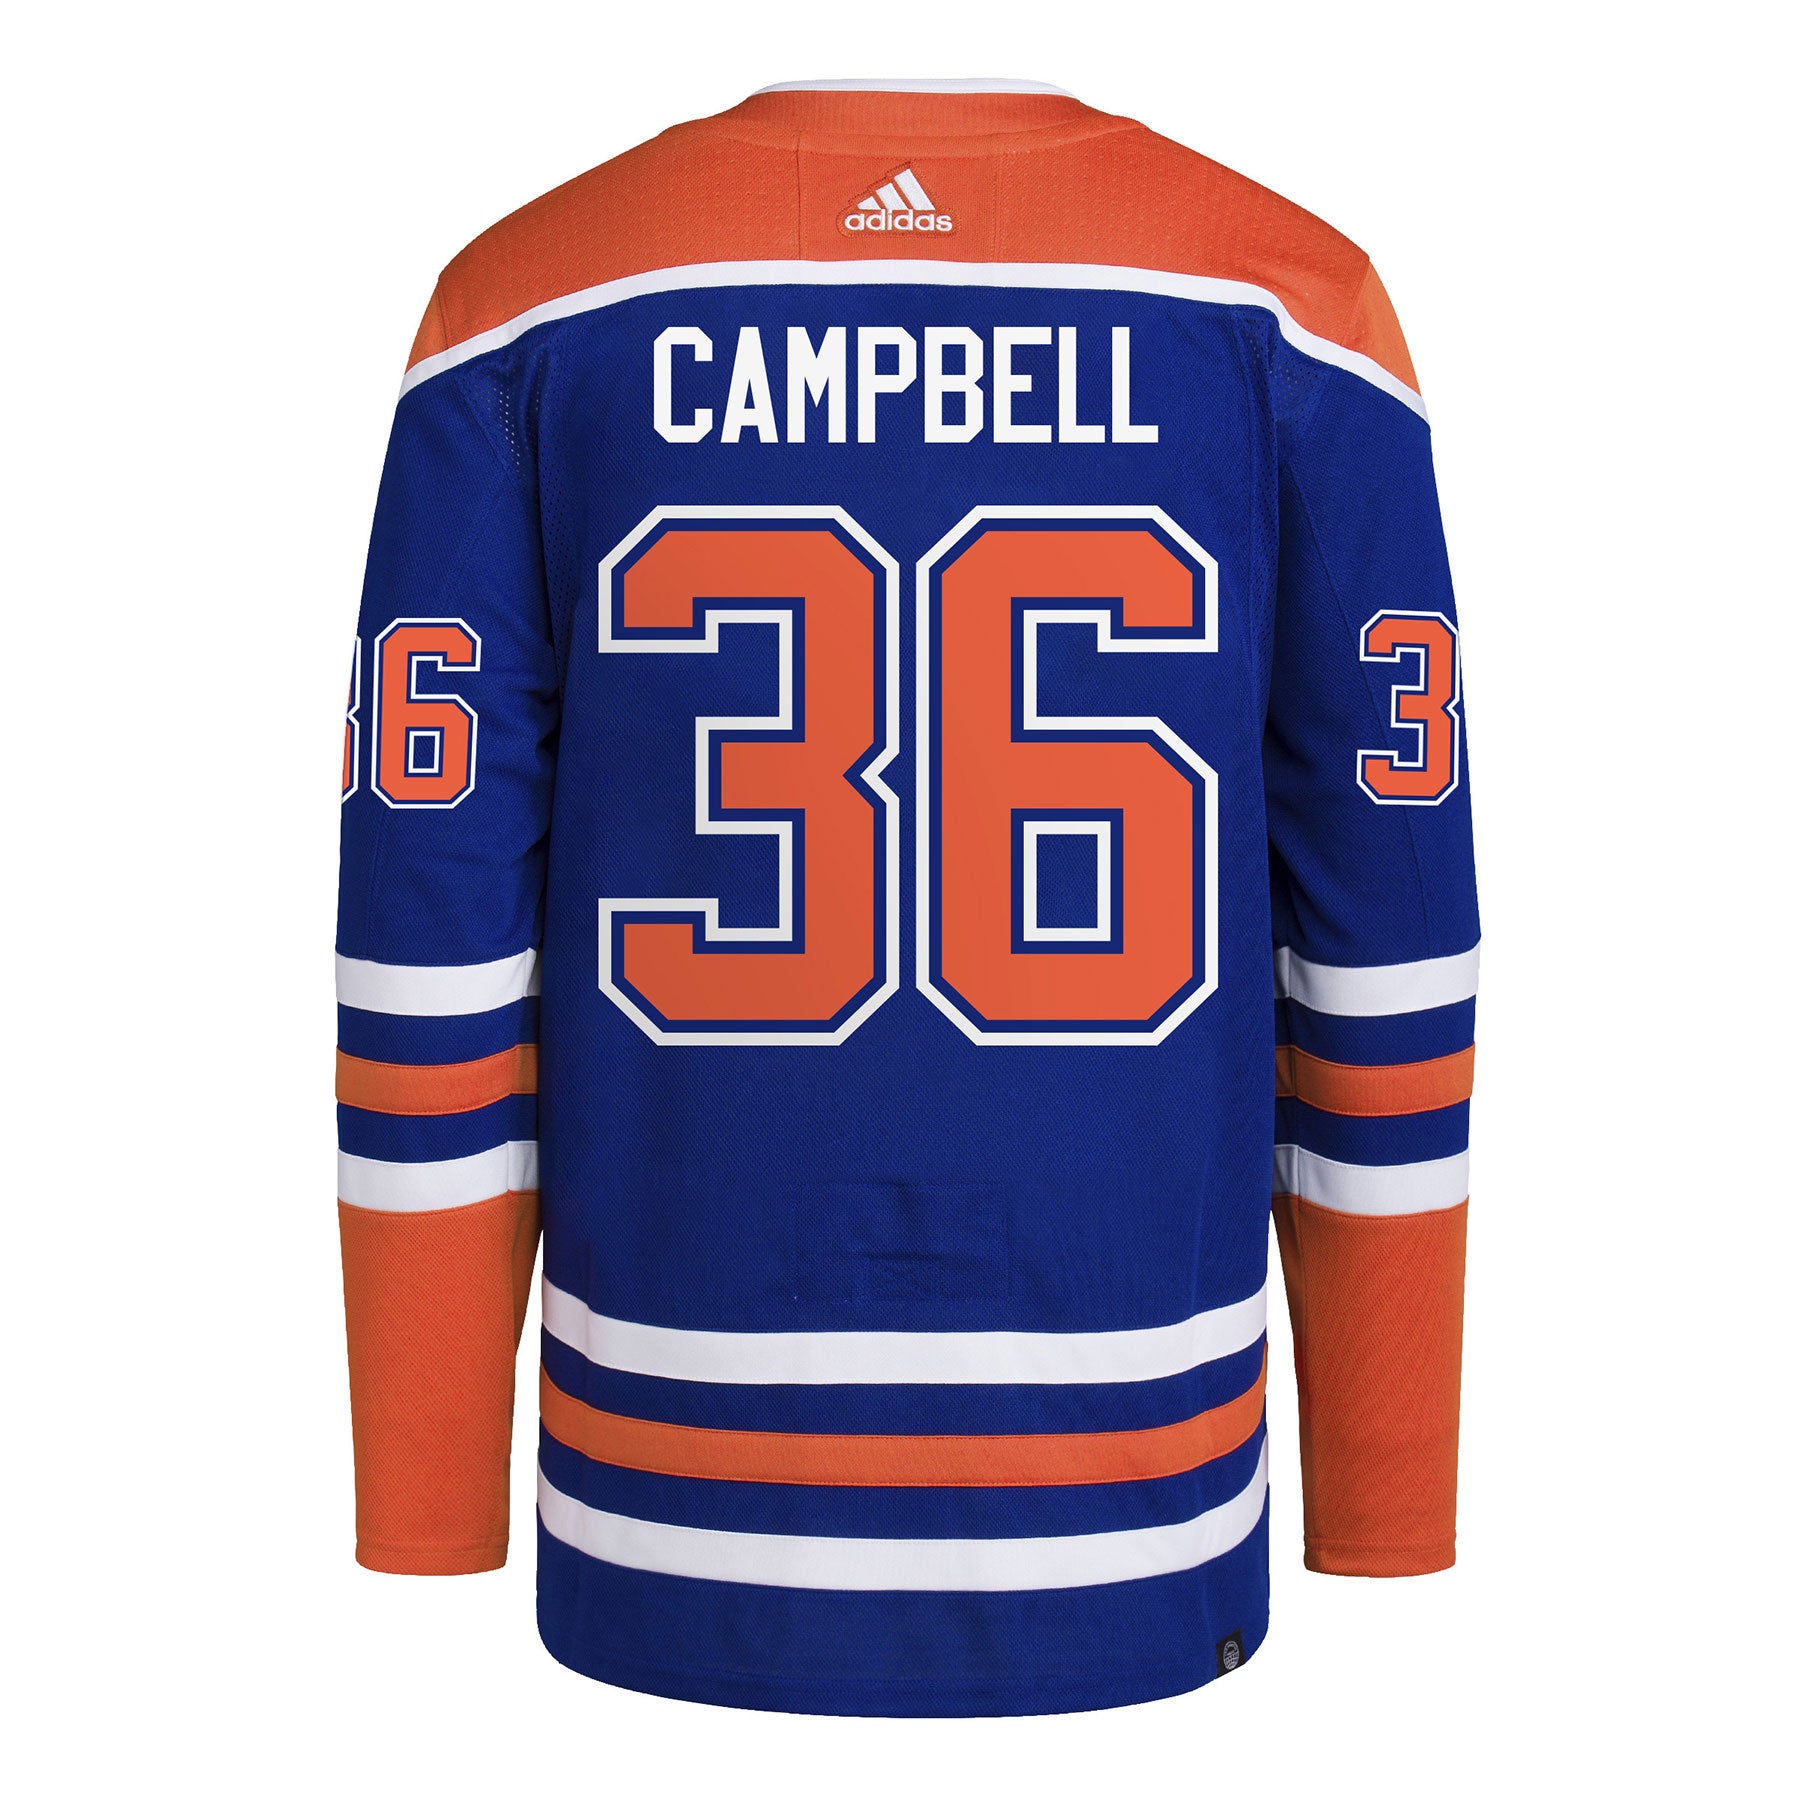 Jack Campbell Memorabilia, Jack Campbell Collectibles, NHL Jack Campbell  Signed Gear